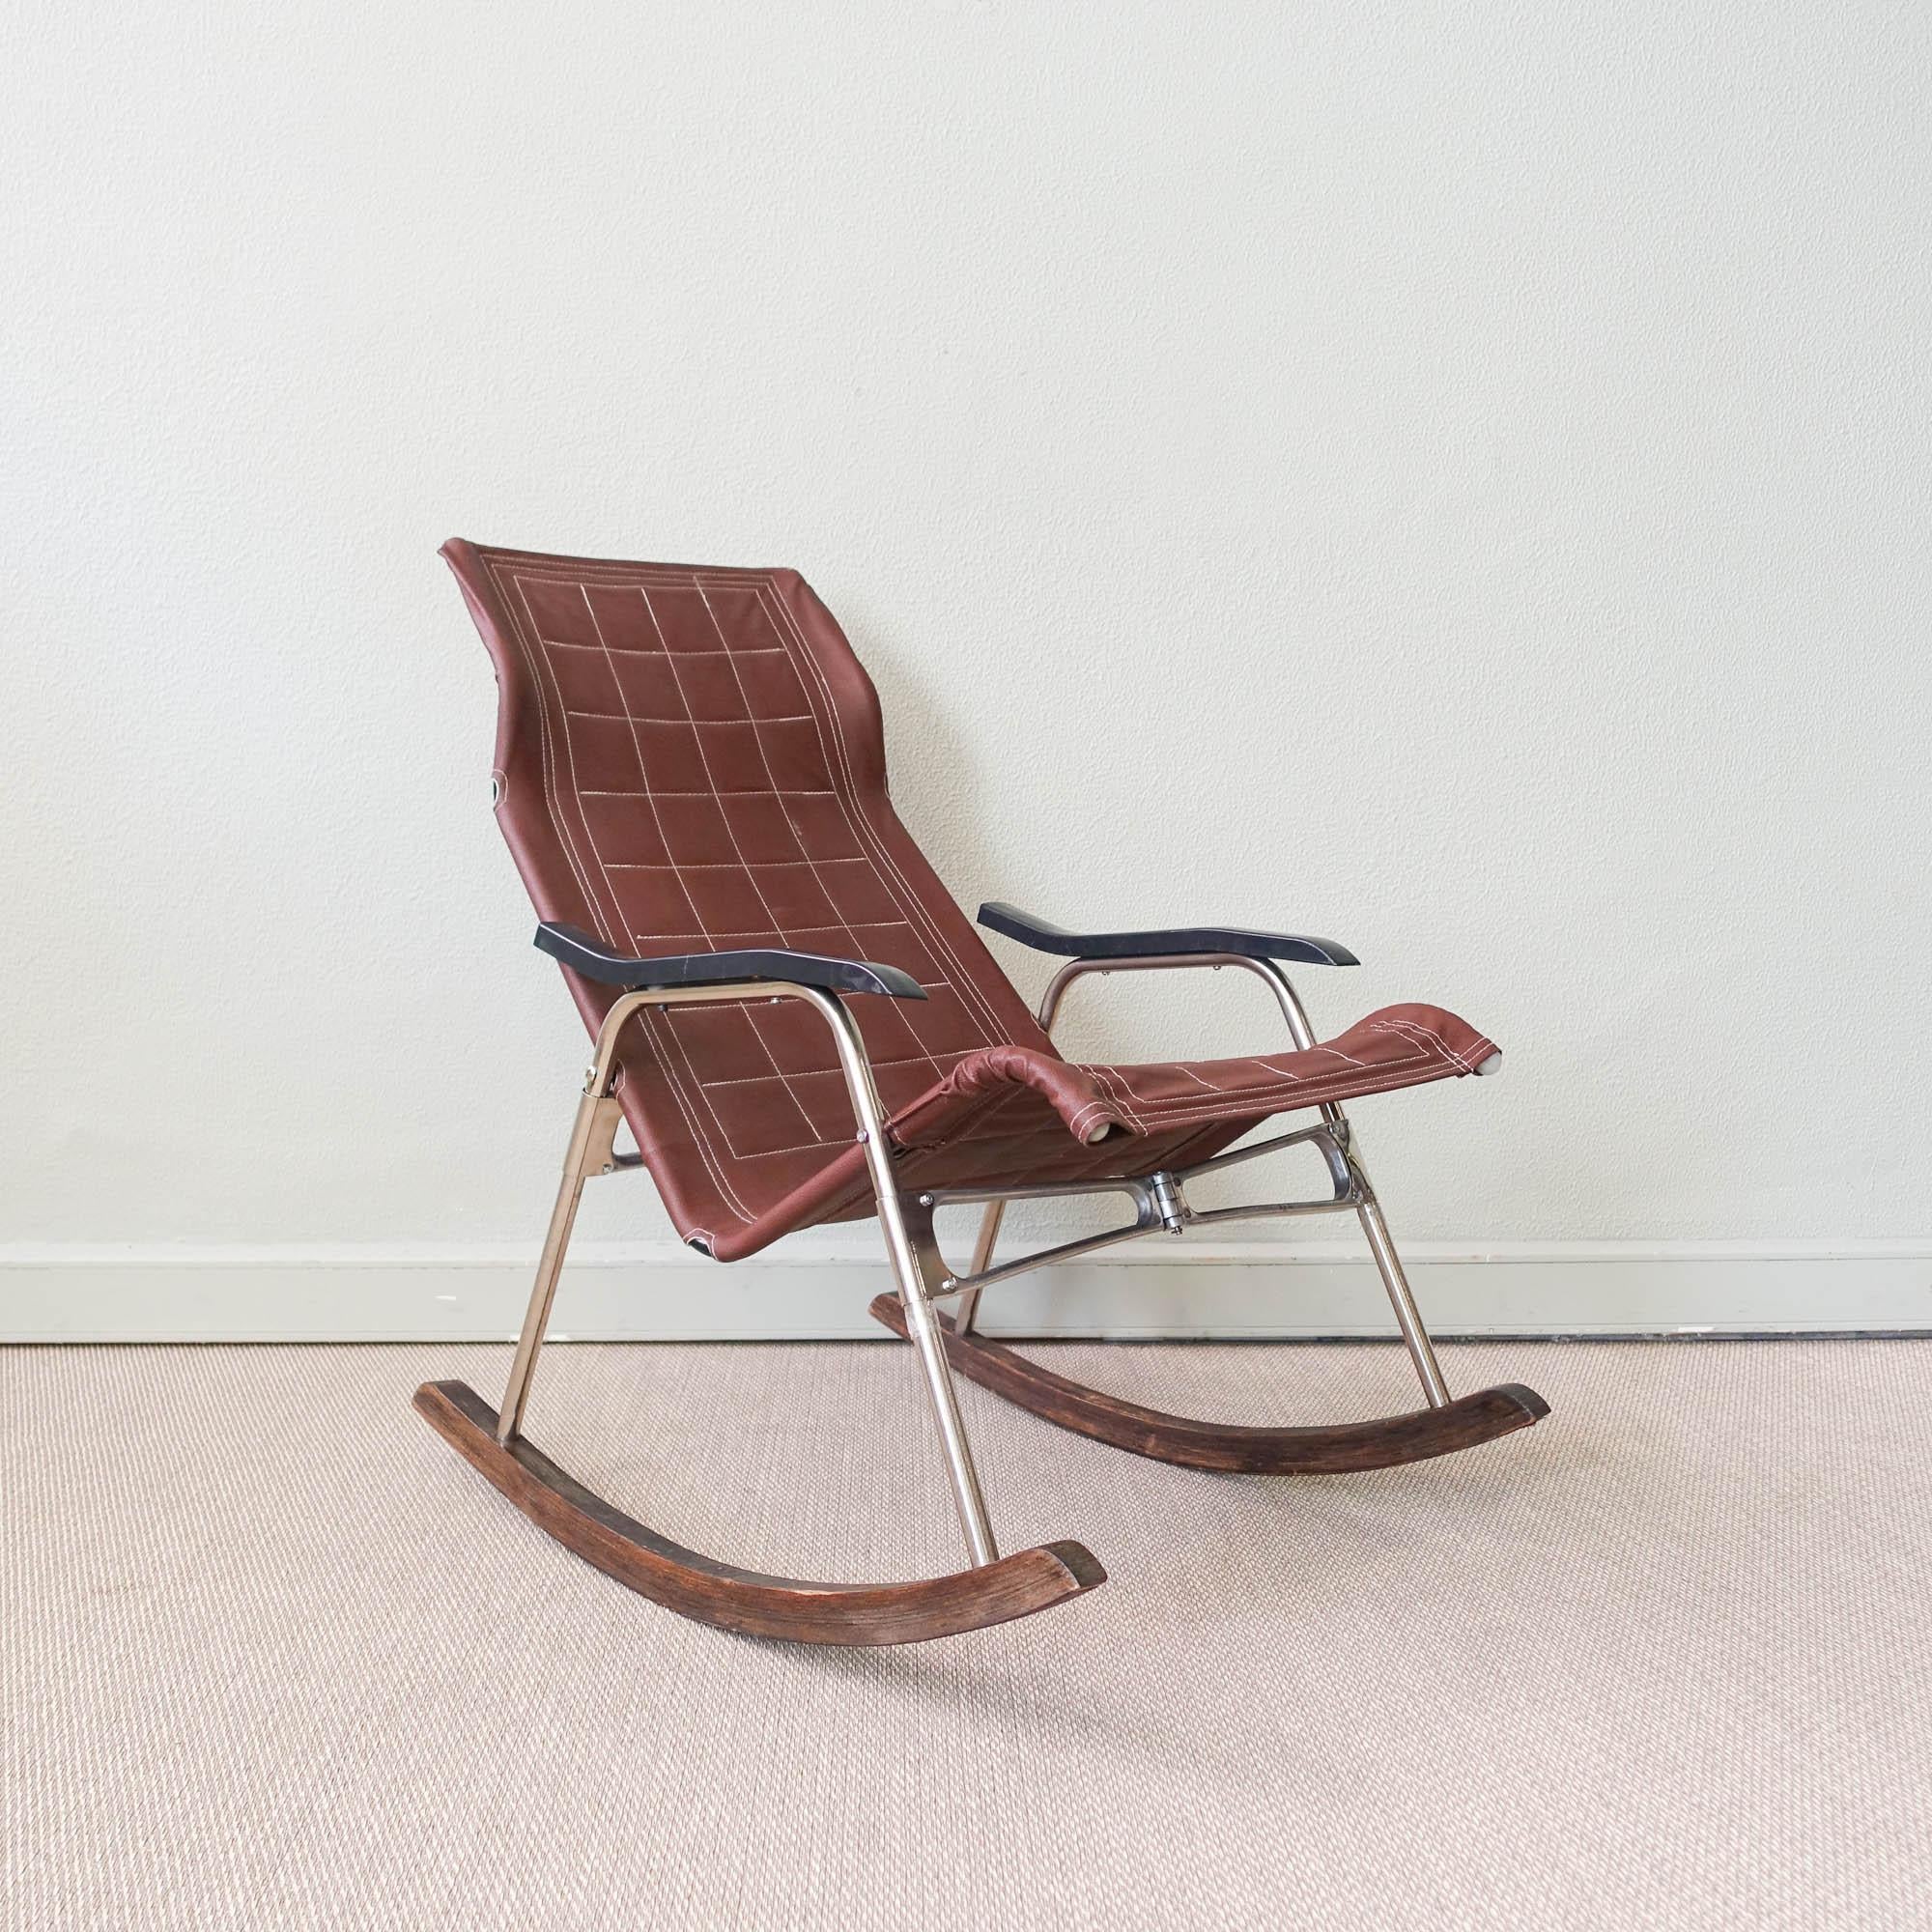 Japanese Foldable Rocking Chair by Takeshi Nii, 1950's In Good Condition For Sale In Lisboa, PT